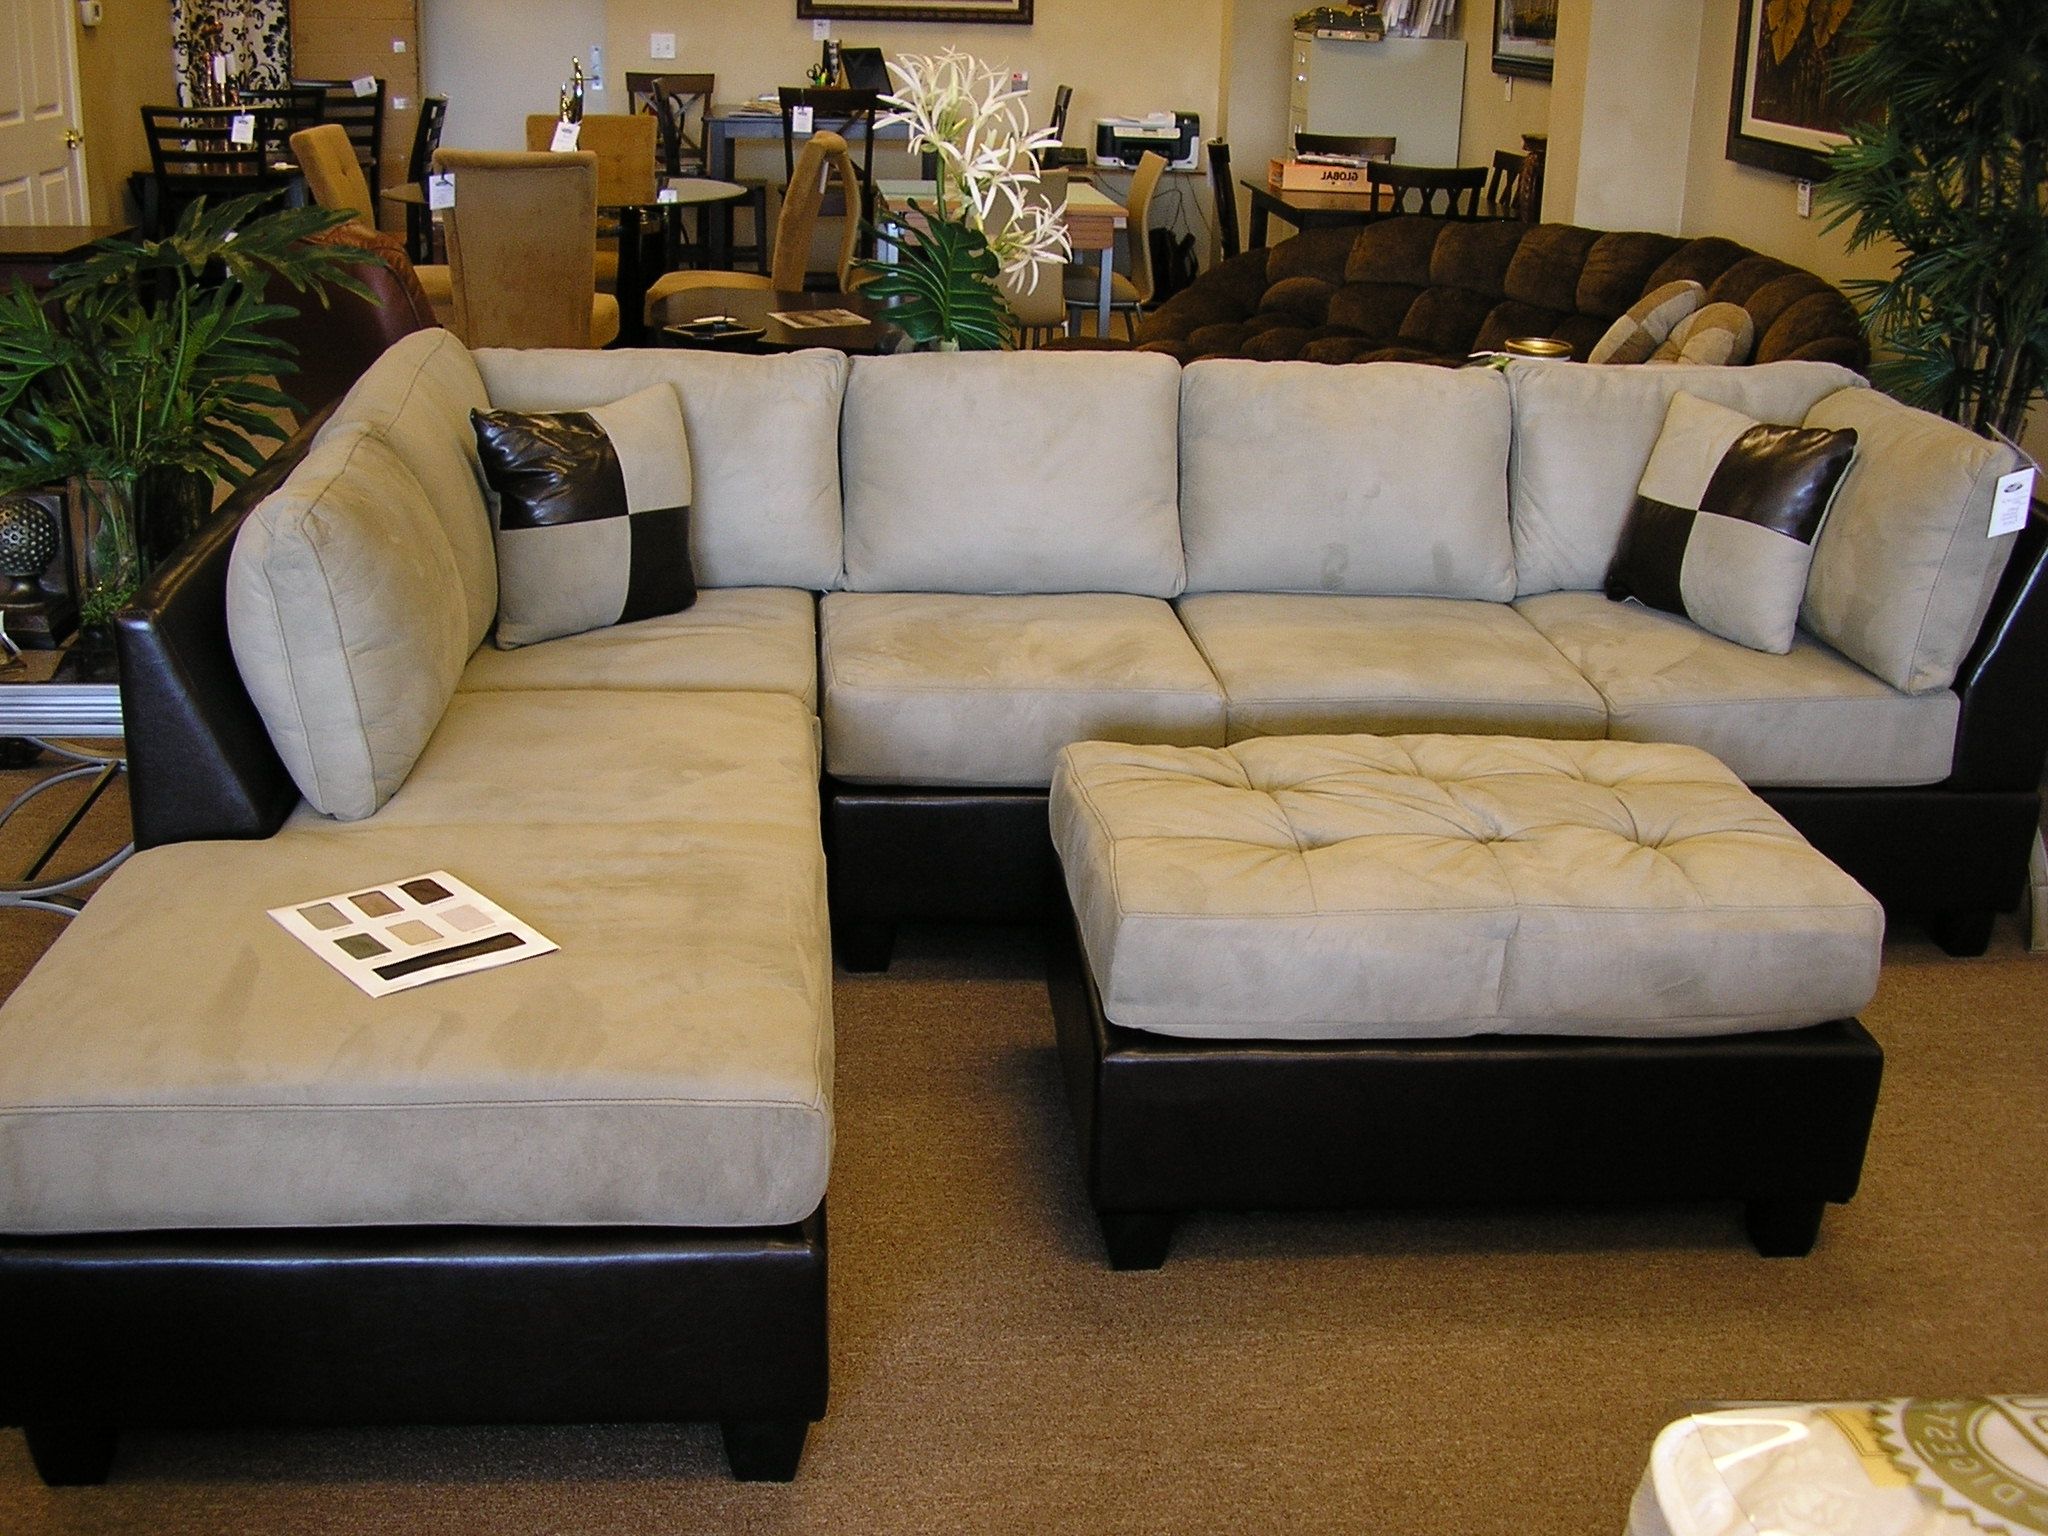 2018 Furniture : Sectional Chaise Lounge Sofa Double Along With Intended For Sectional Sofas With Chaise Lounge And Ottoman (View 1 of 15)